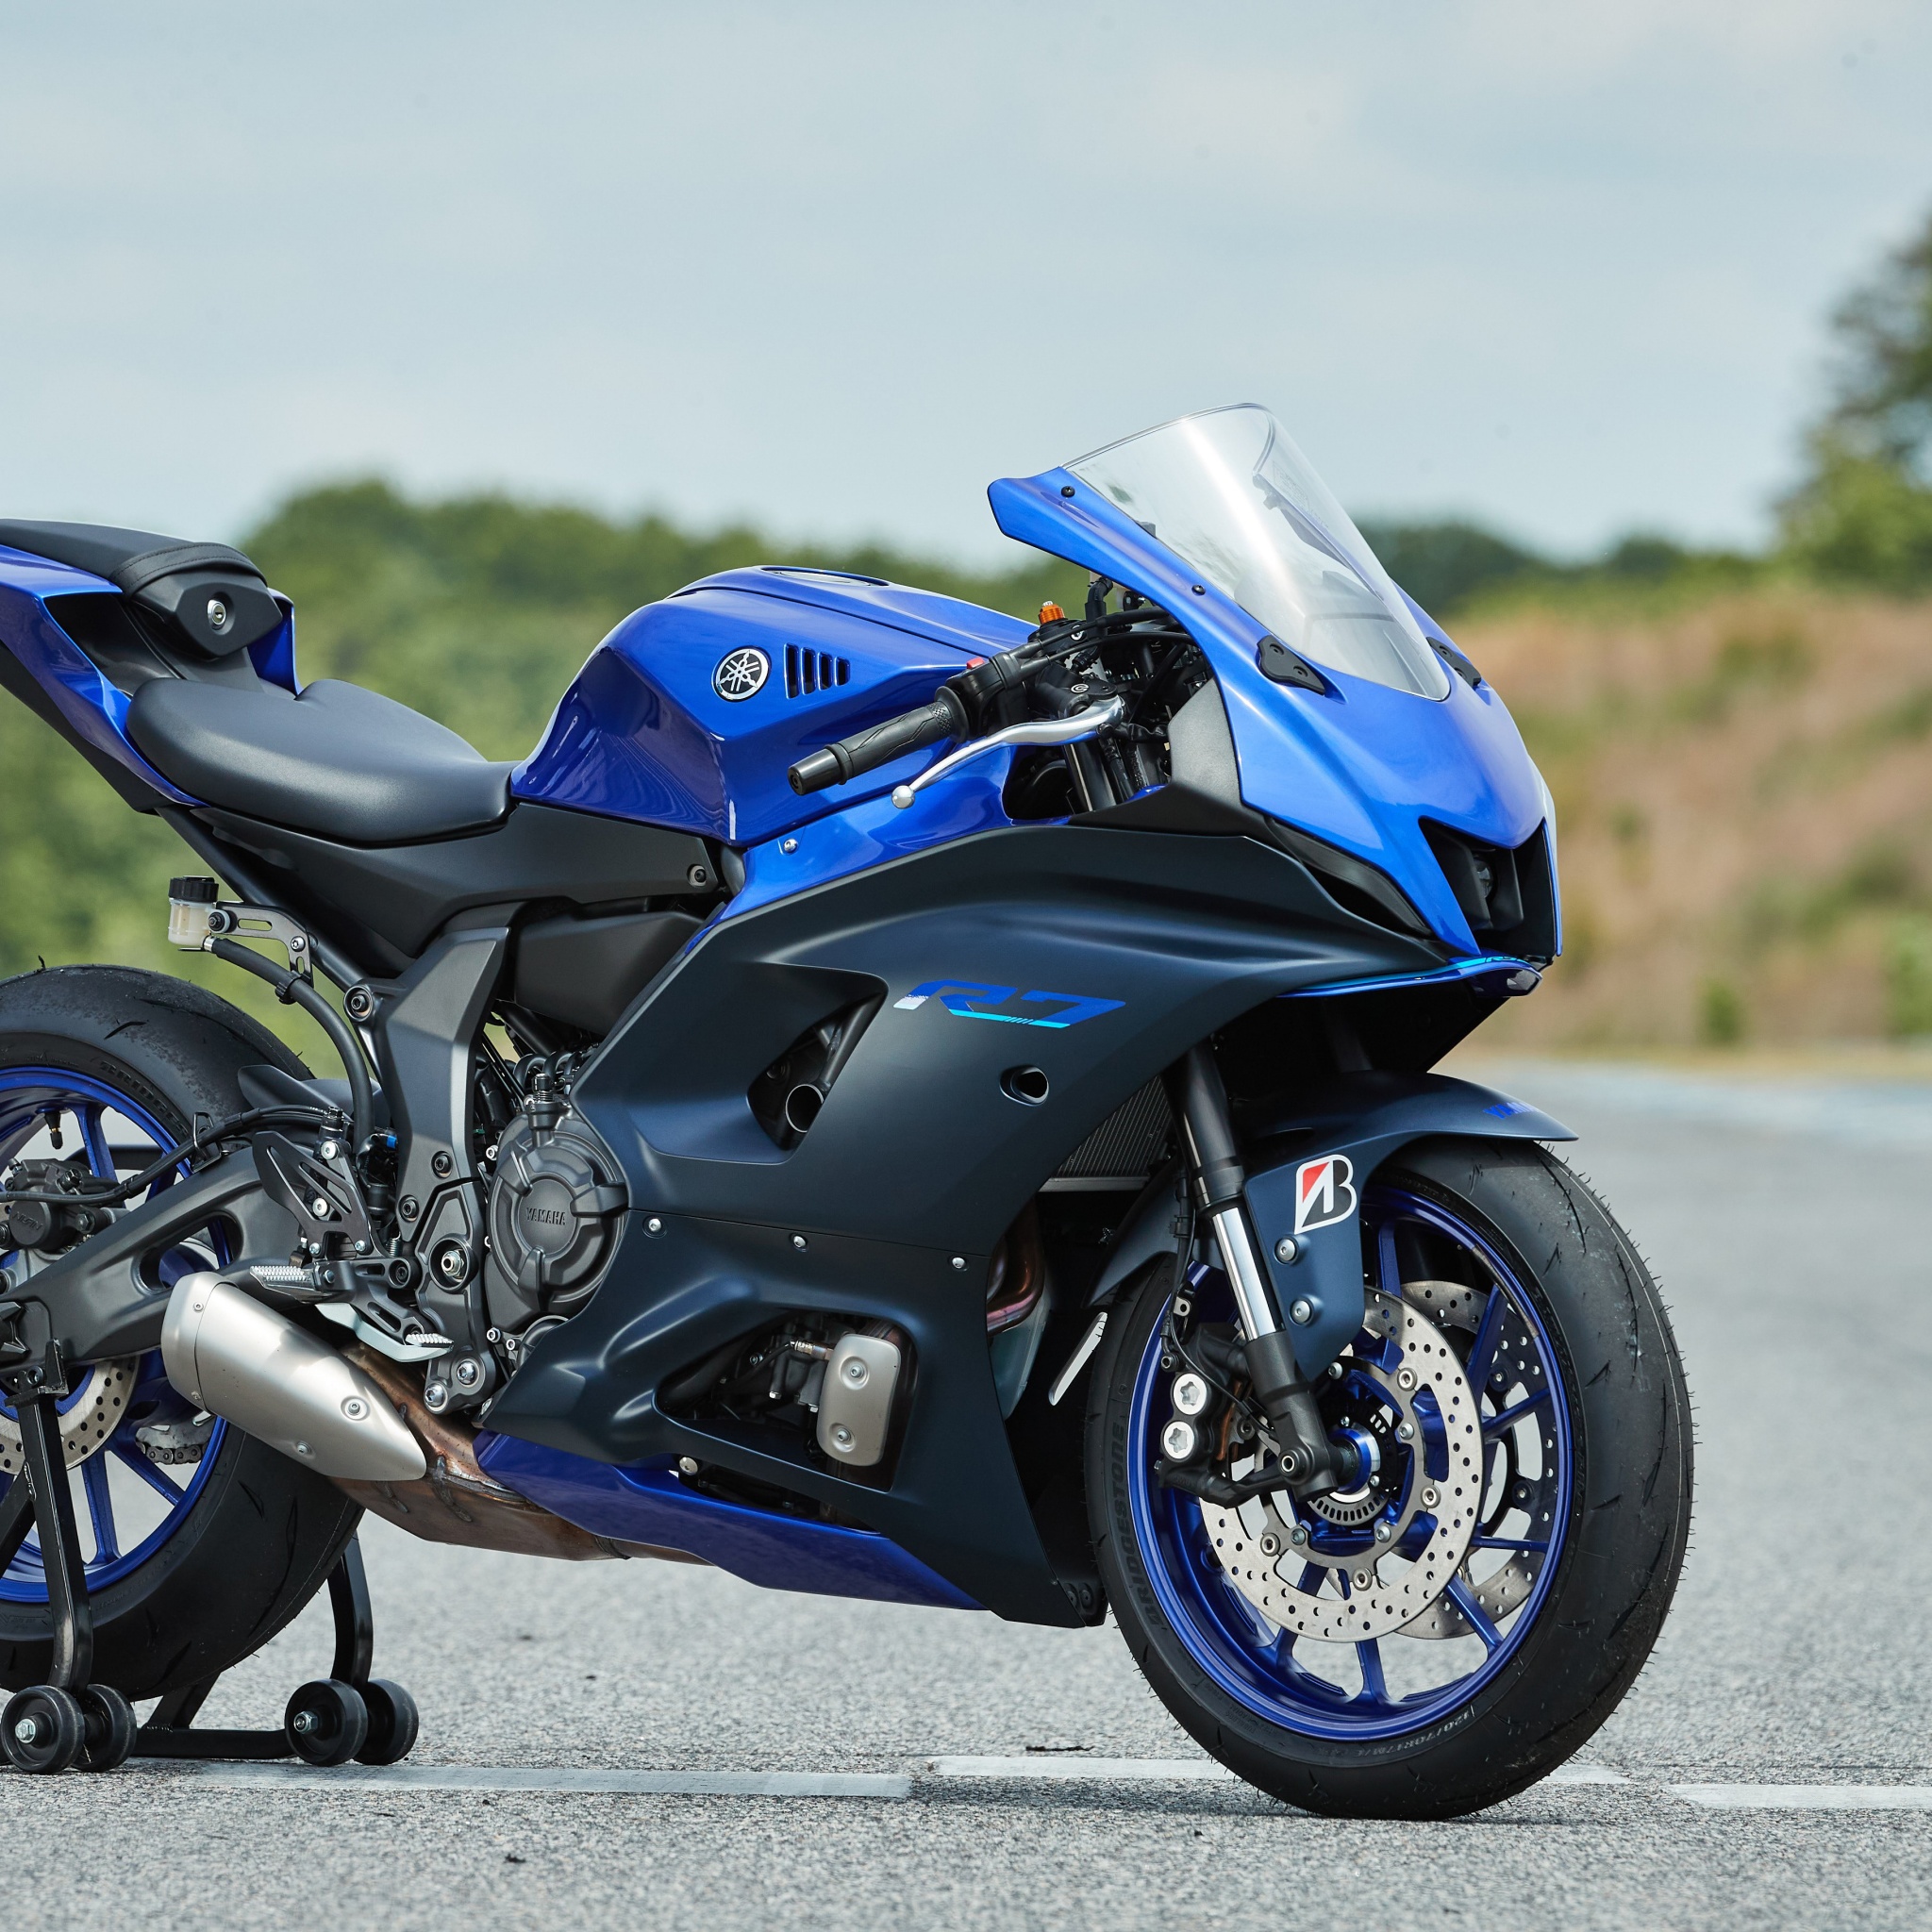 Yamaha YZF-R7 Sports Bike Pictures